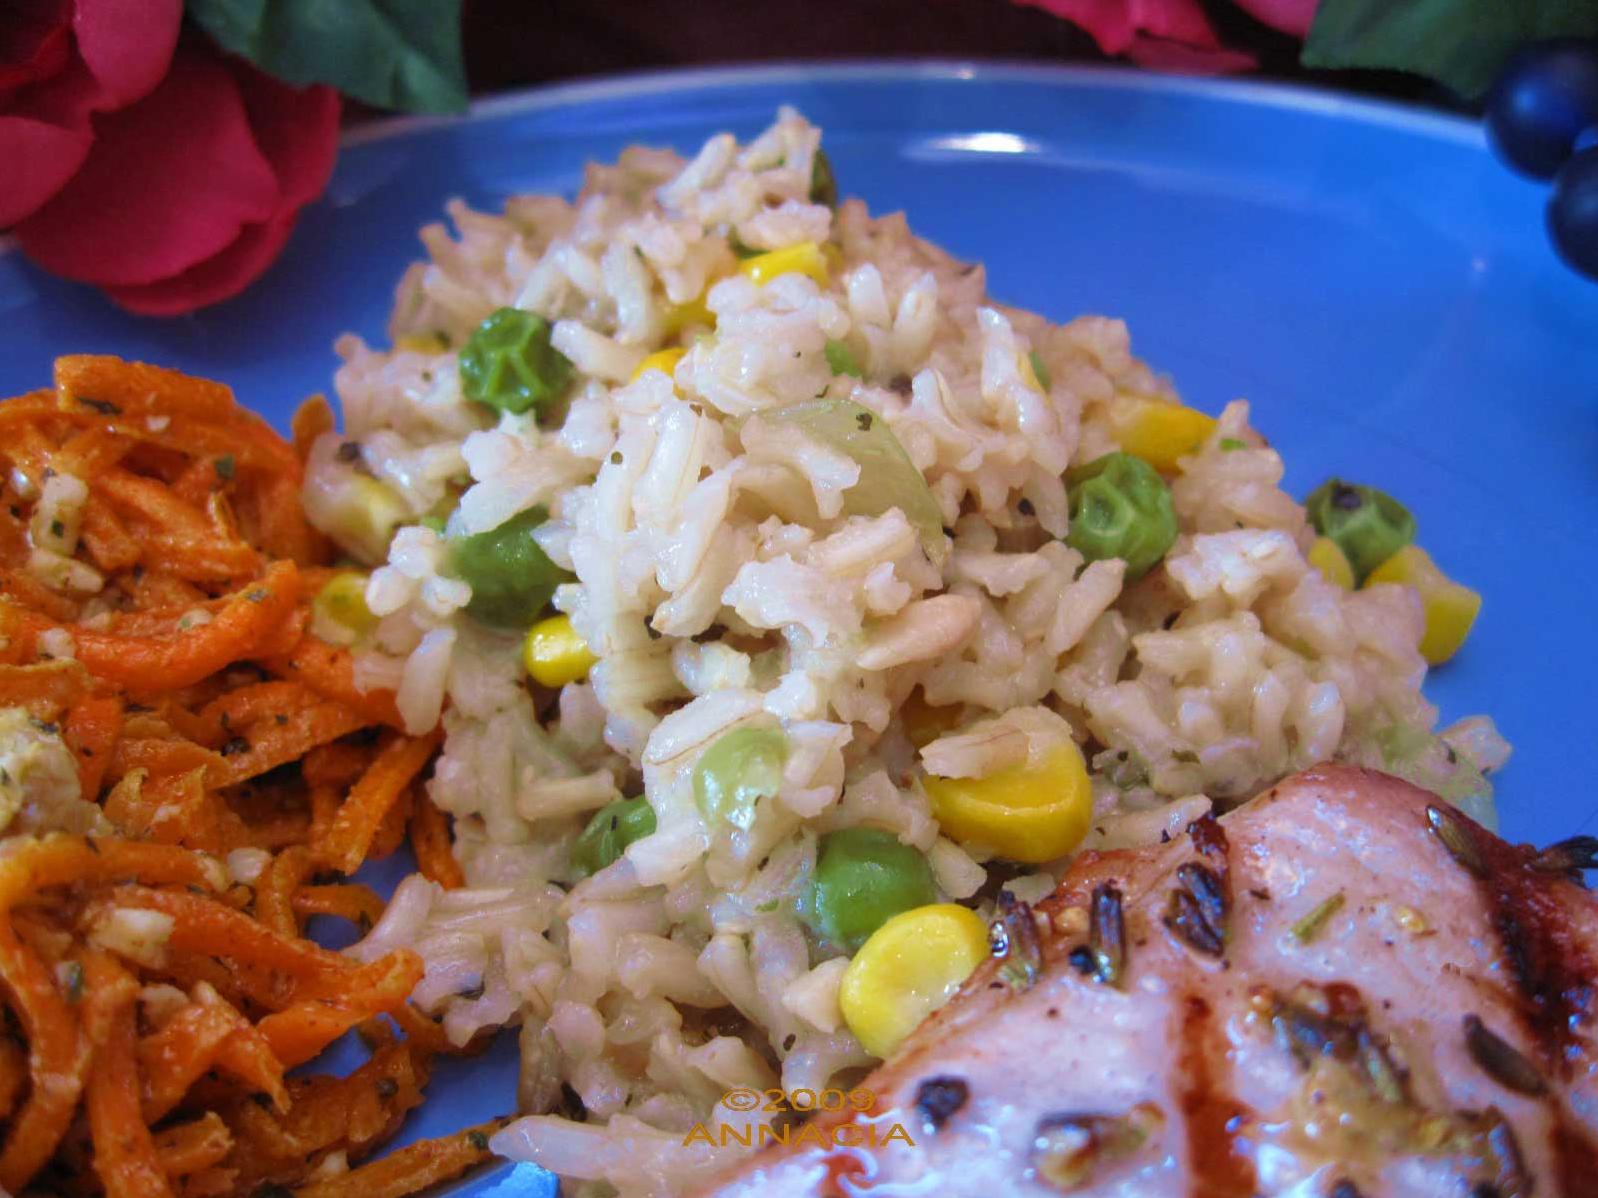  Delightfully nutty and satisfying, this brown rice pilaf is both delicious and good for you.